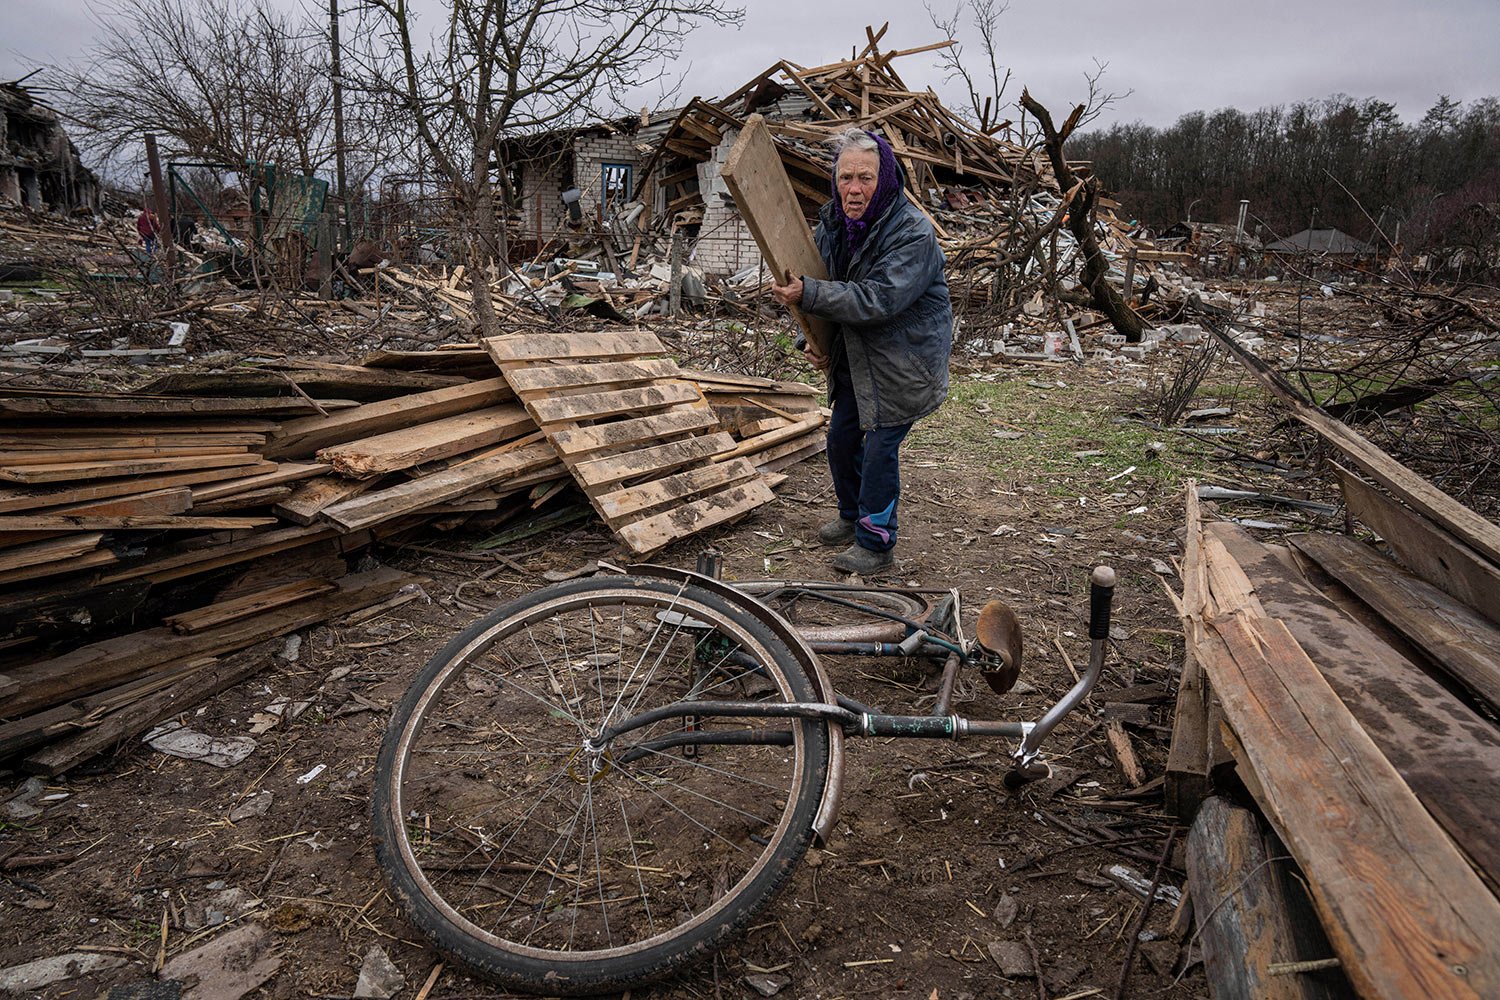  A woman collects wooden planks in a street destroyed by shelling in Chernihiv, Ukraine, Wednesday, April 13, 2022. (AP Photo/Evgeniy Maloletka) 